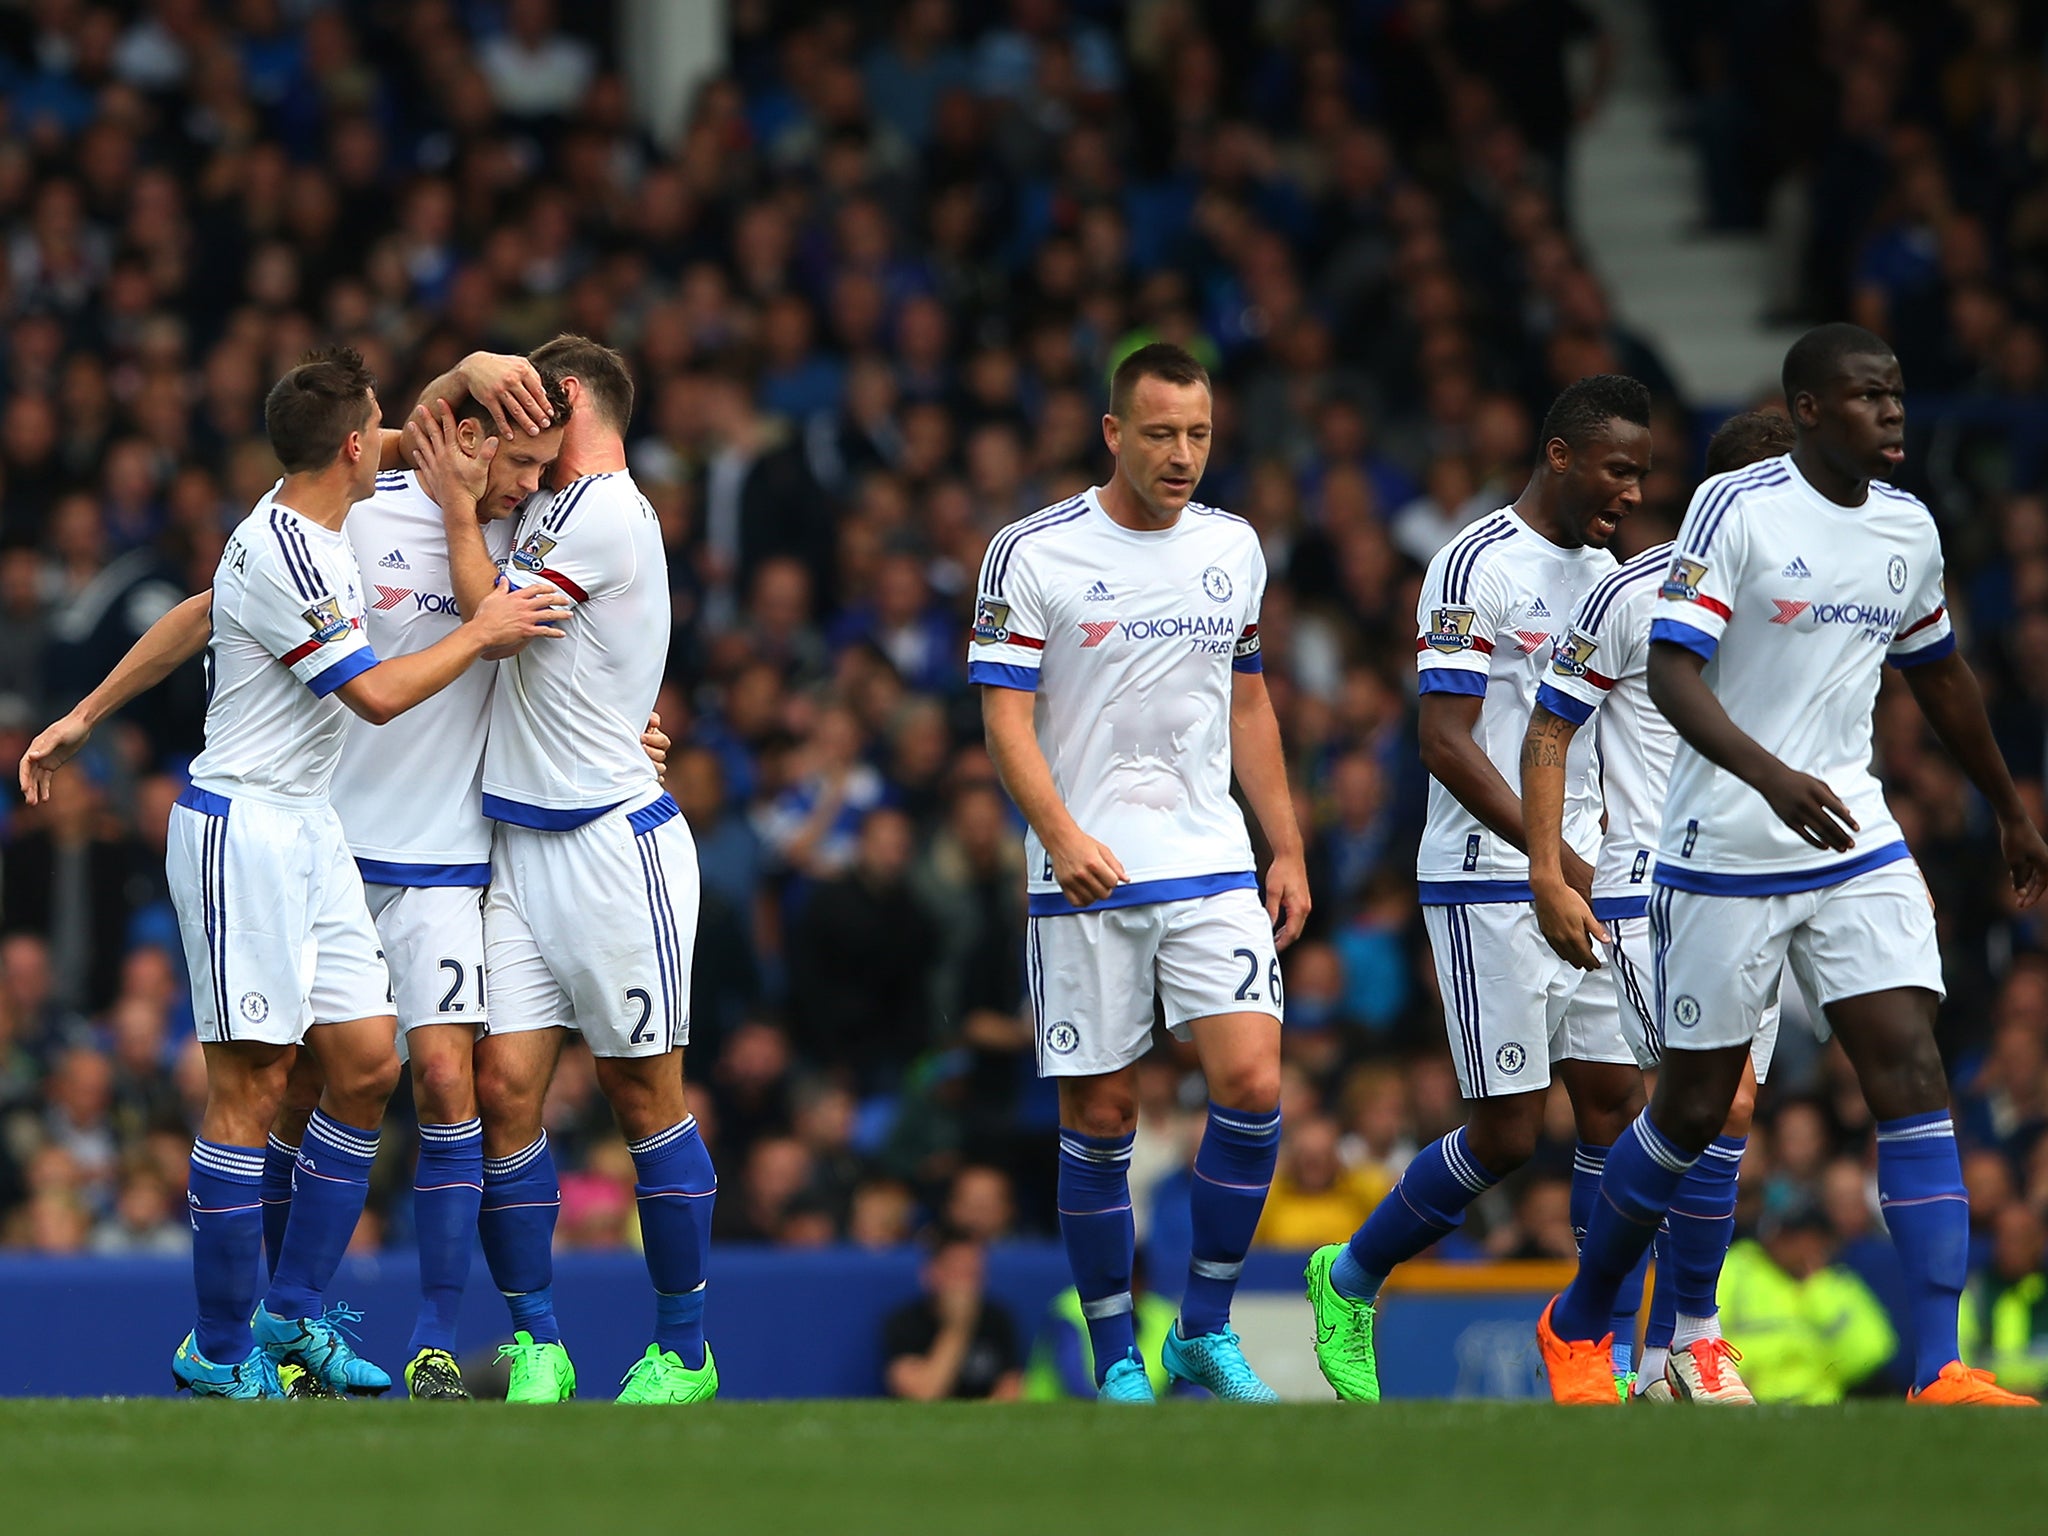 Nemanja Matic scored with a brilliant strike to bring Chelsea back into the game